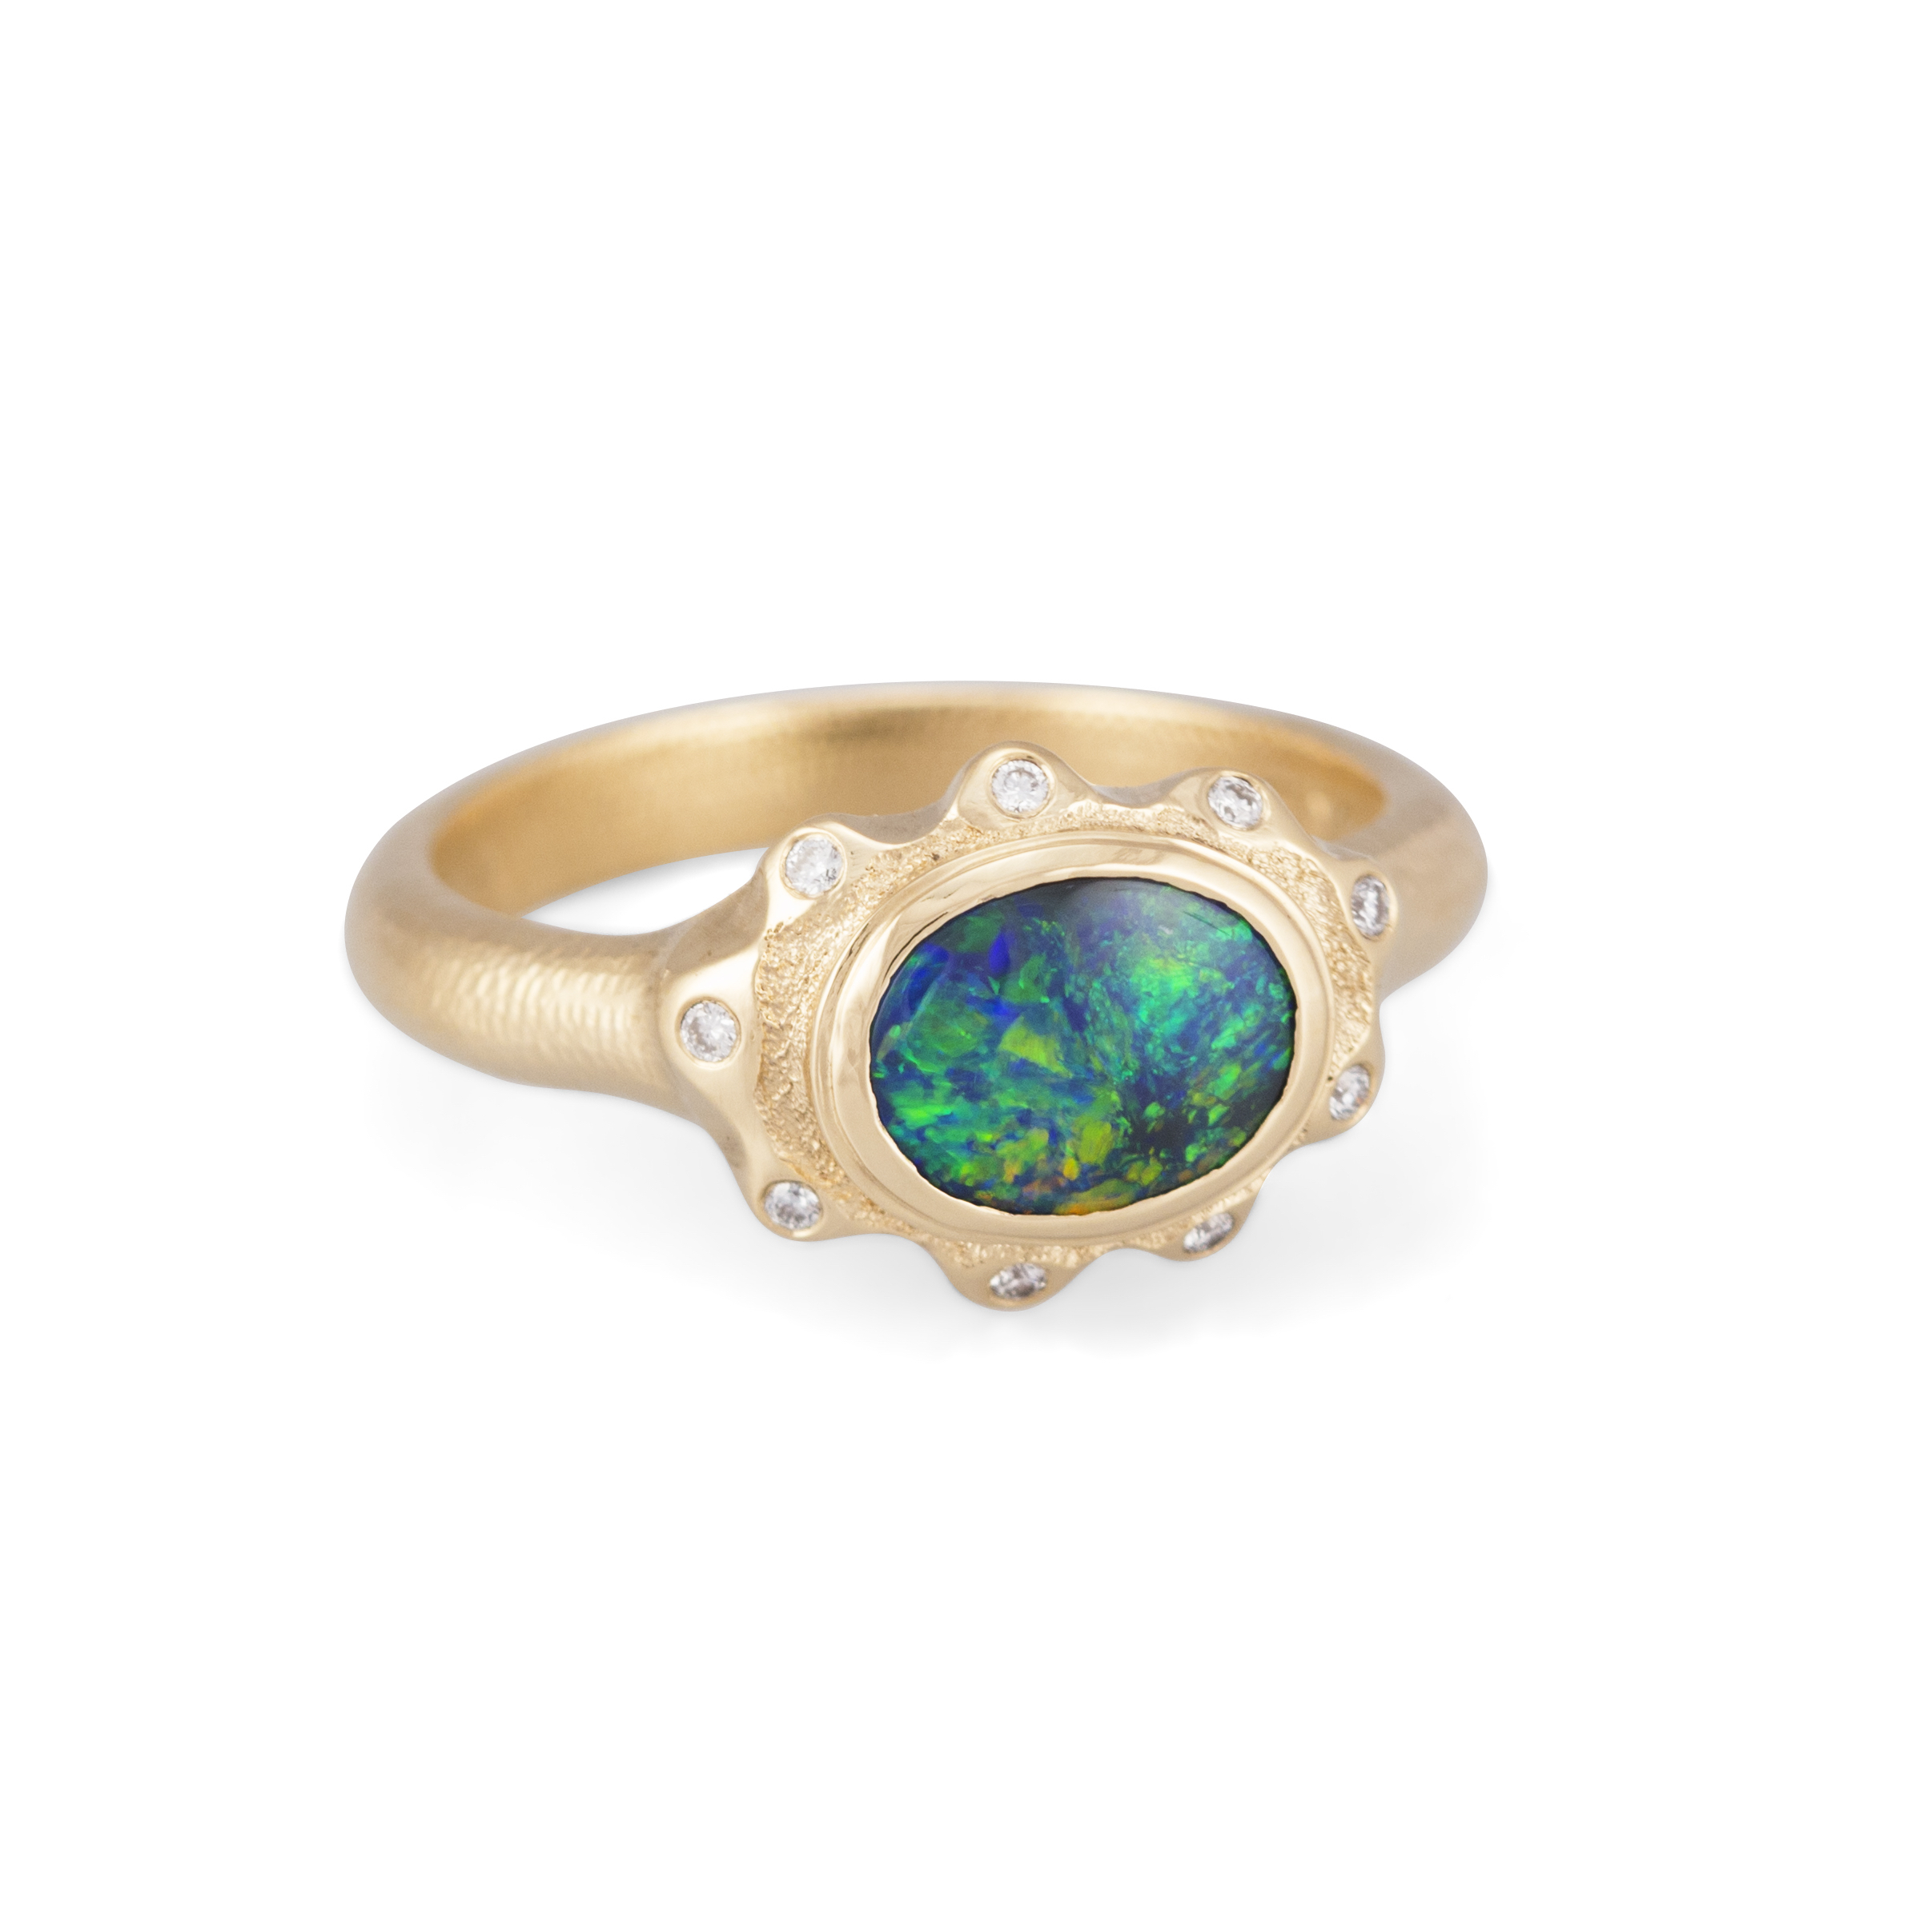 Sparks ring 3 by Audrius Krulis. 18K yellow gold, opal and white diamonds